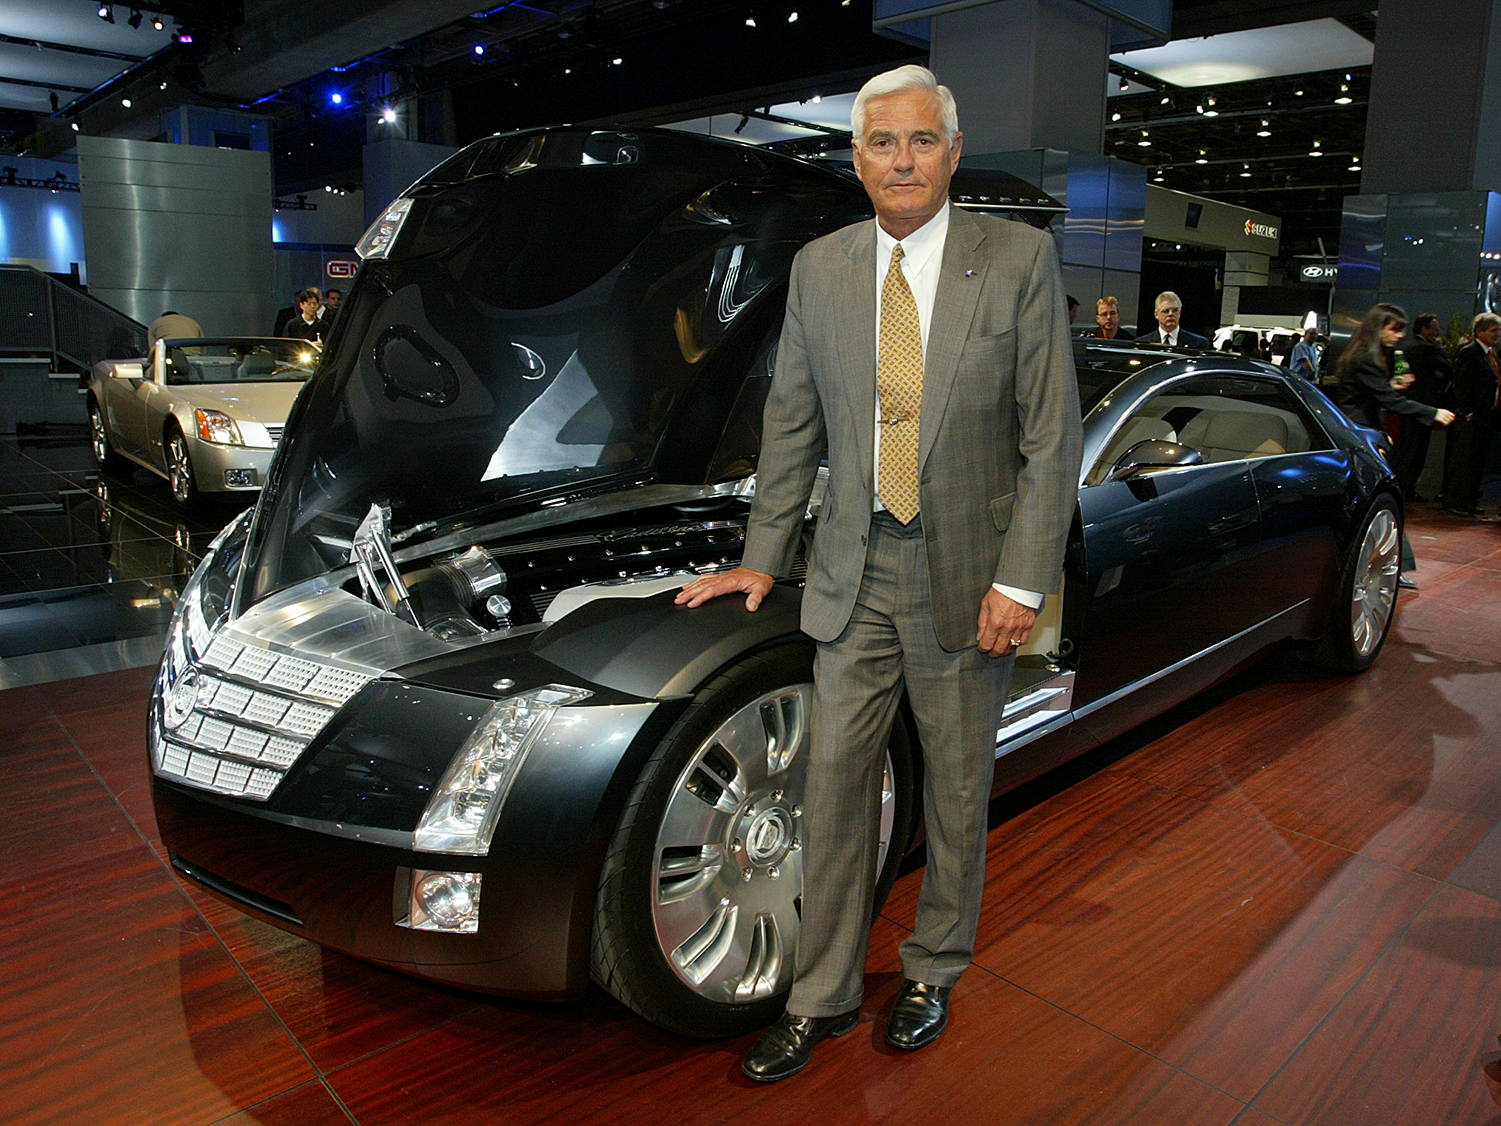 Robert A. Lutz, GM vice chairman for product development, stands with the 2003 Cadillac Sixteen concept car at the North American International Auto Show in Detroit, MI on January 6, 2003